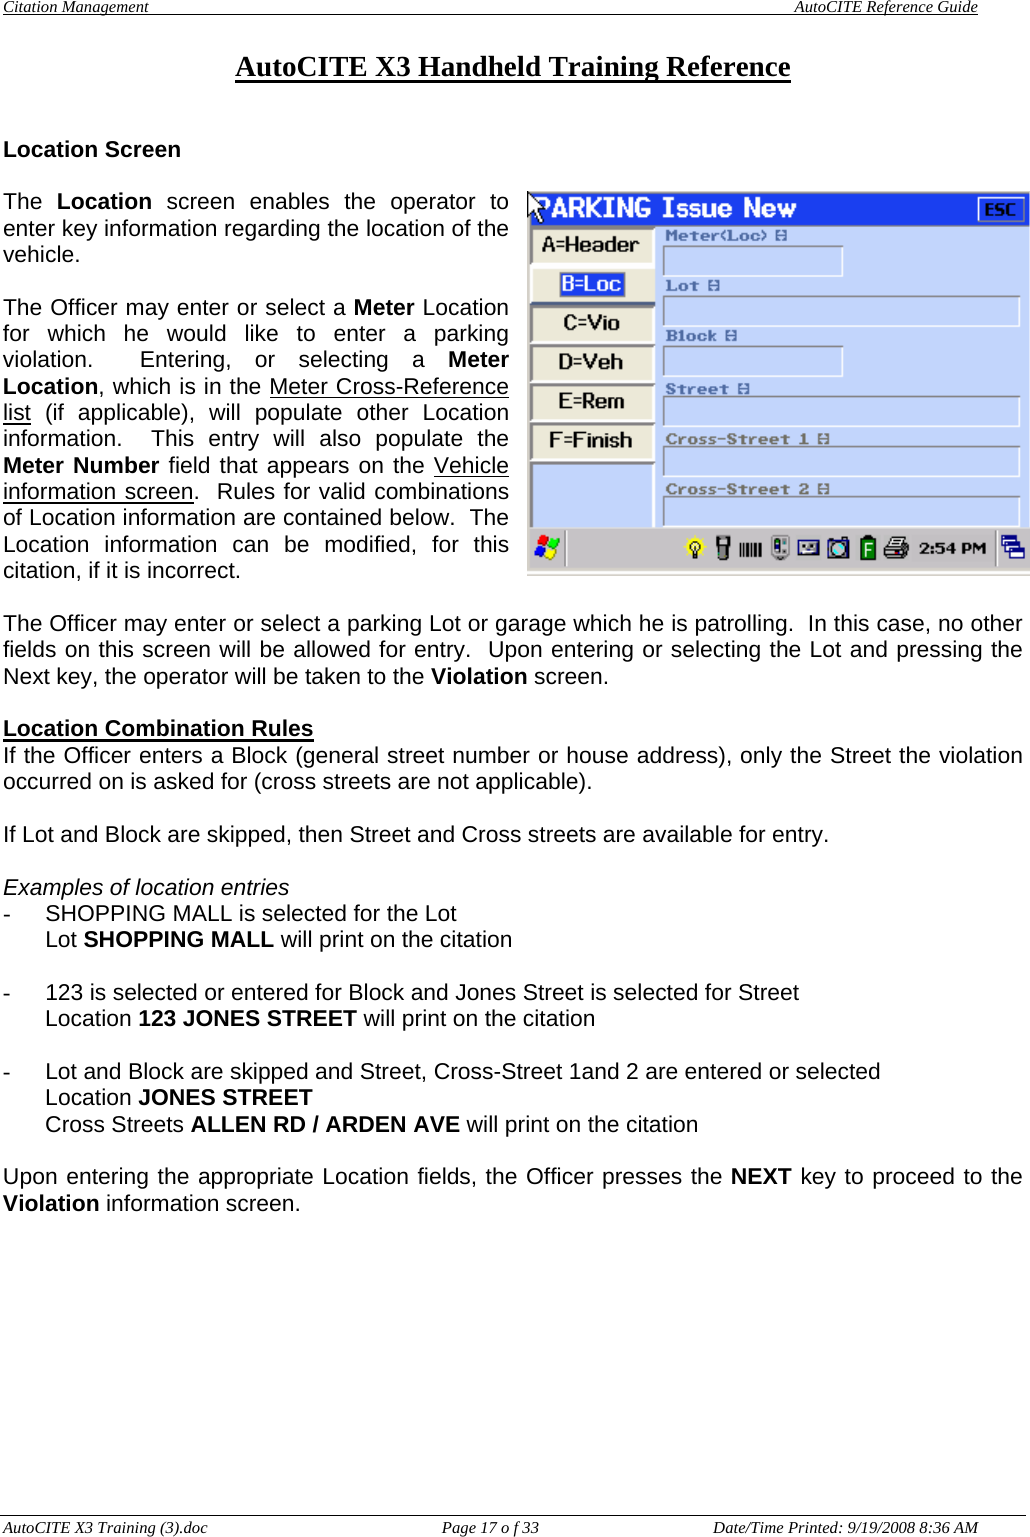 Citation Management    AutoCITE Reference Guide  AutoCITE X3 Handheld Training Reference AutoCITE X3 Training (3).doc  Page 17 o f 33  Date/Time Printed: 9/19/2008 8:36 AM Location Screen  The  Location screen enables the operator to enter key information regarding the location of the vehicle.  The Officer may enter or select a Meter Location for which he would like to enter a parking violation.  Entering, or selecting a Meter Location, which is in the Meter Cross-Reference list (if applicable), will populate other Location information.  This entry will also populate the Meter Number field that appears on the Vehicle information screen.  Rules for valid combinations of Location information are contained below.  The Location information can be modified, for this citation, if it is incorrect.  The Officer may enter or select a parking Lot or garage which he is patrolling.  In this case, no other fields on this screen will be allowed for entry.  Upon entering or selecting the Lot and pressing the Next key, the operator will be taken to the Violation screen.  Location Combination Rules If the Officer enters a Block (general street number or house address), only the Street the violation occurred on is asked for (cross streets are not applicable).    If Lot and Block are skipped, then Street and Cross streets are available for entry.    Examples of location entries -  SHOPPING MALL is selected for the Lot     Lot SHOPPING MALL will print on the citation  -  123 is selected or entered for Block and Jones Street is selected for Street    Location 123 JONES STREET will print on the citation  -  Lot and Block are skipped and Street, Cross-Street 1and 2 are entered or selected Location JONES STREET Cross Streets ALLEN RD / ARDEN AVE will print on the citation  Upon entering the appropriate Location fields, the Officer presses the NEXT key to proceed to the Violation information screen. 